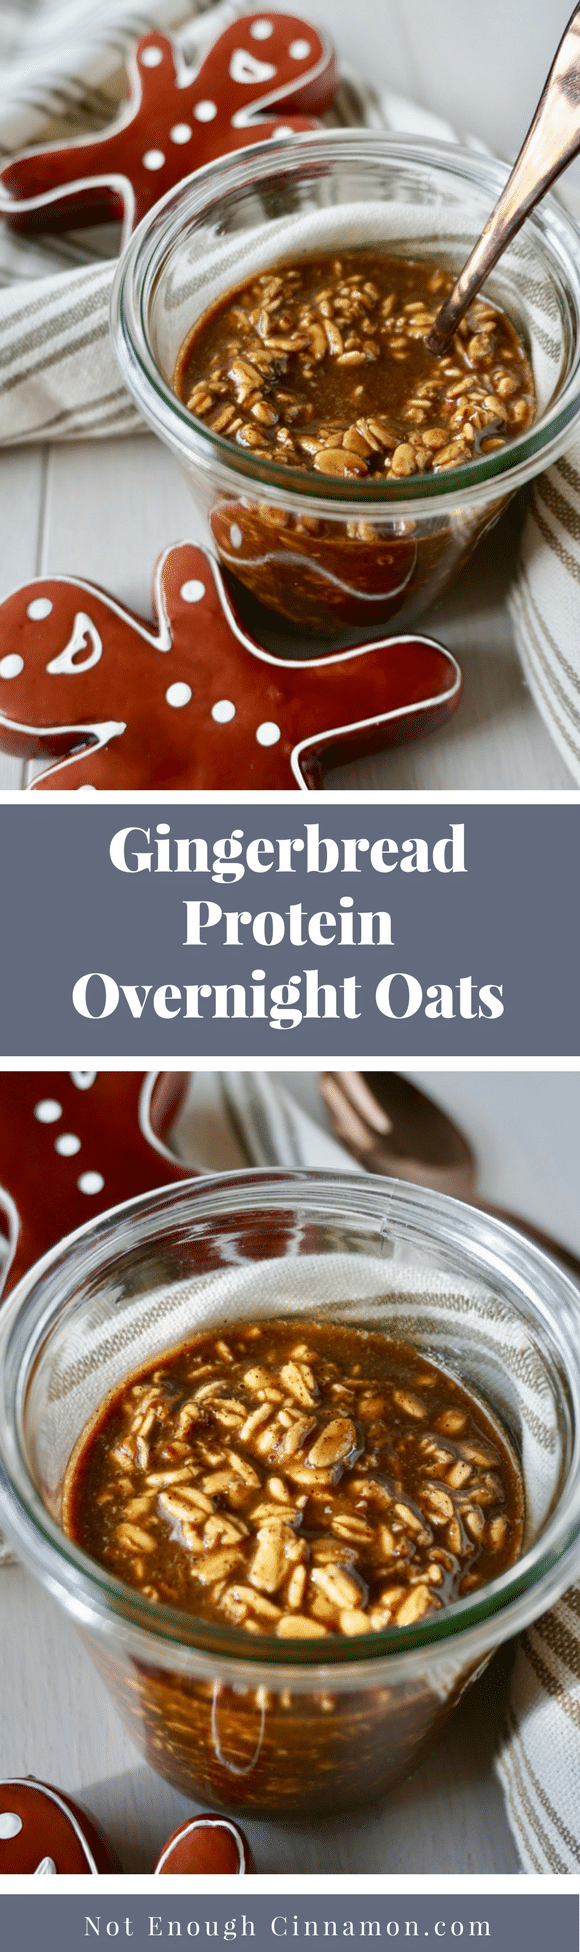 Click to see the recipe on NotEnoughCinnamon.com – An easy festive and nutritious breakfast recipe you can make ahead and grab from the fridge in the morning. #glutenfree #cleaneating